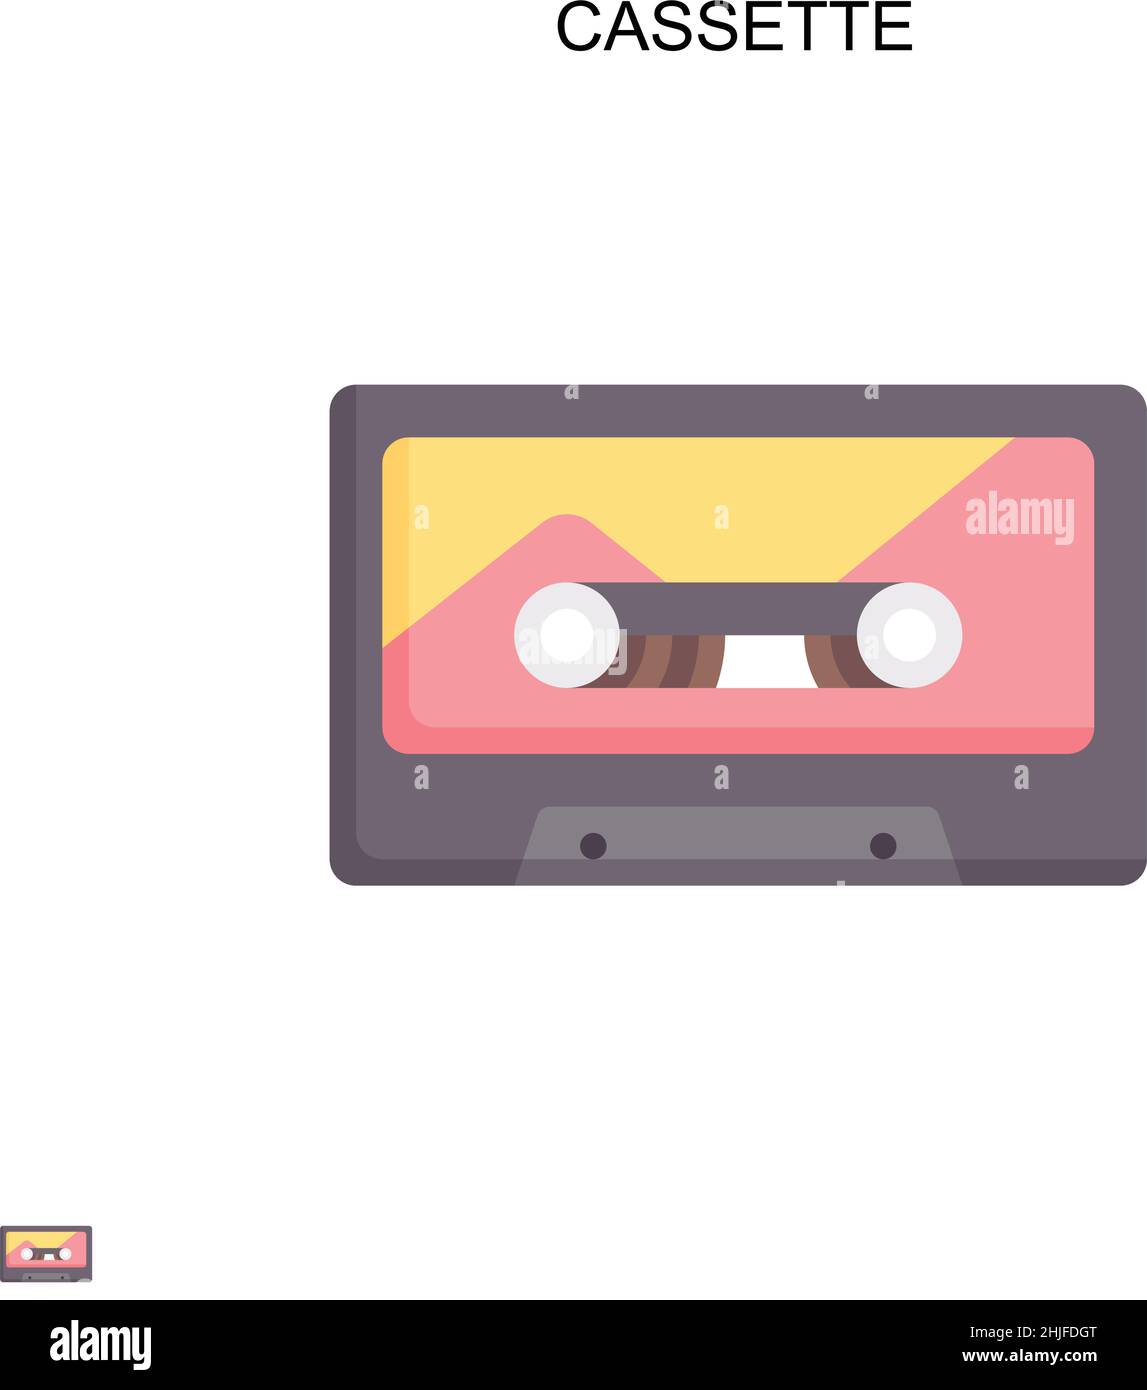 Retro Plastic Audio Cassette, Music Cassette, Cassette Tape. Isolated On  White Background. Realistic Illustration Of Old Technology. Vintage Tape.  Royalty Free SVG, Cliparts, Vectors, and Stock Illustration. Image 54482577.